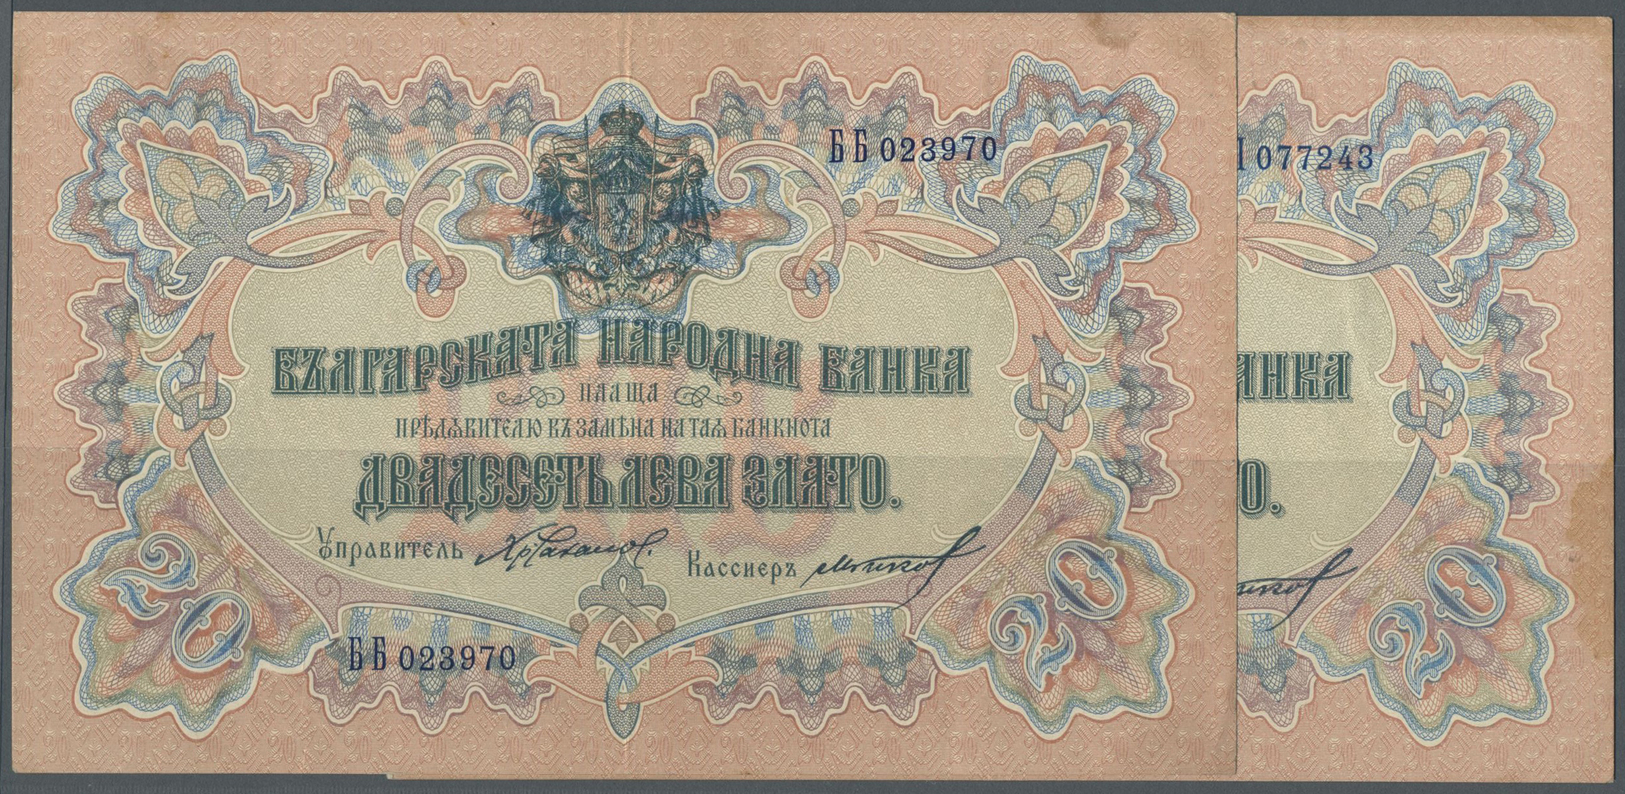 00372 Bulgaria / Bulgarien: Set Of 2 Notes 20 Leva ND(1904) P. 9e, Both Notes Used With Center Fold, And Light Staining - Bulgaria